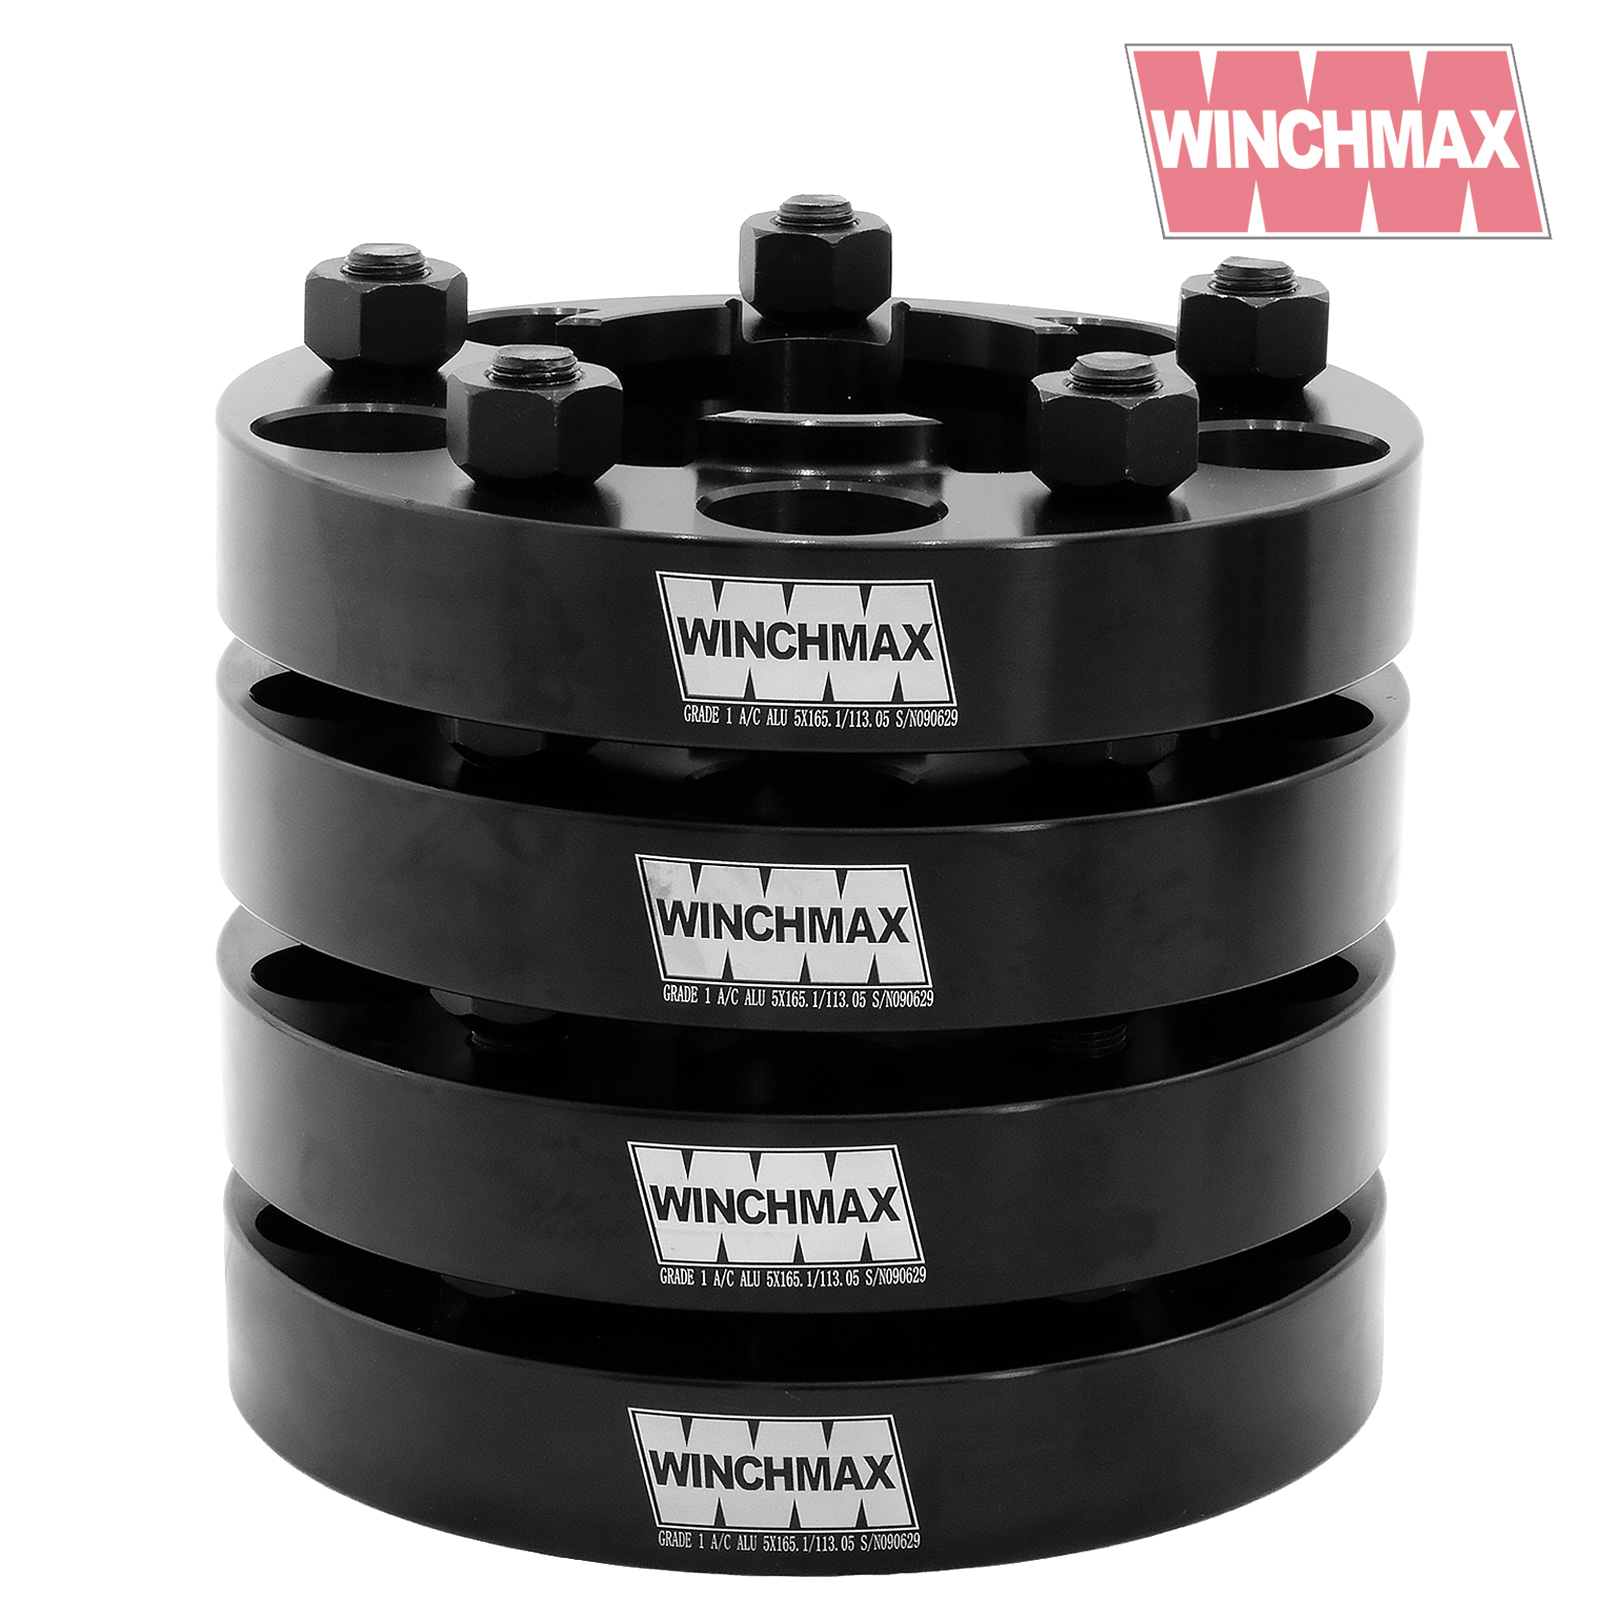 WINCHMAX 38mm Wheel Spacer